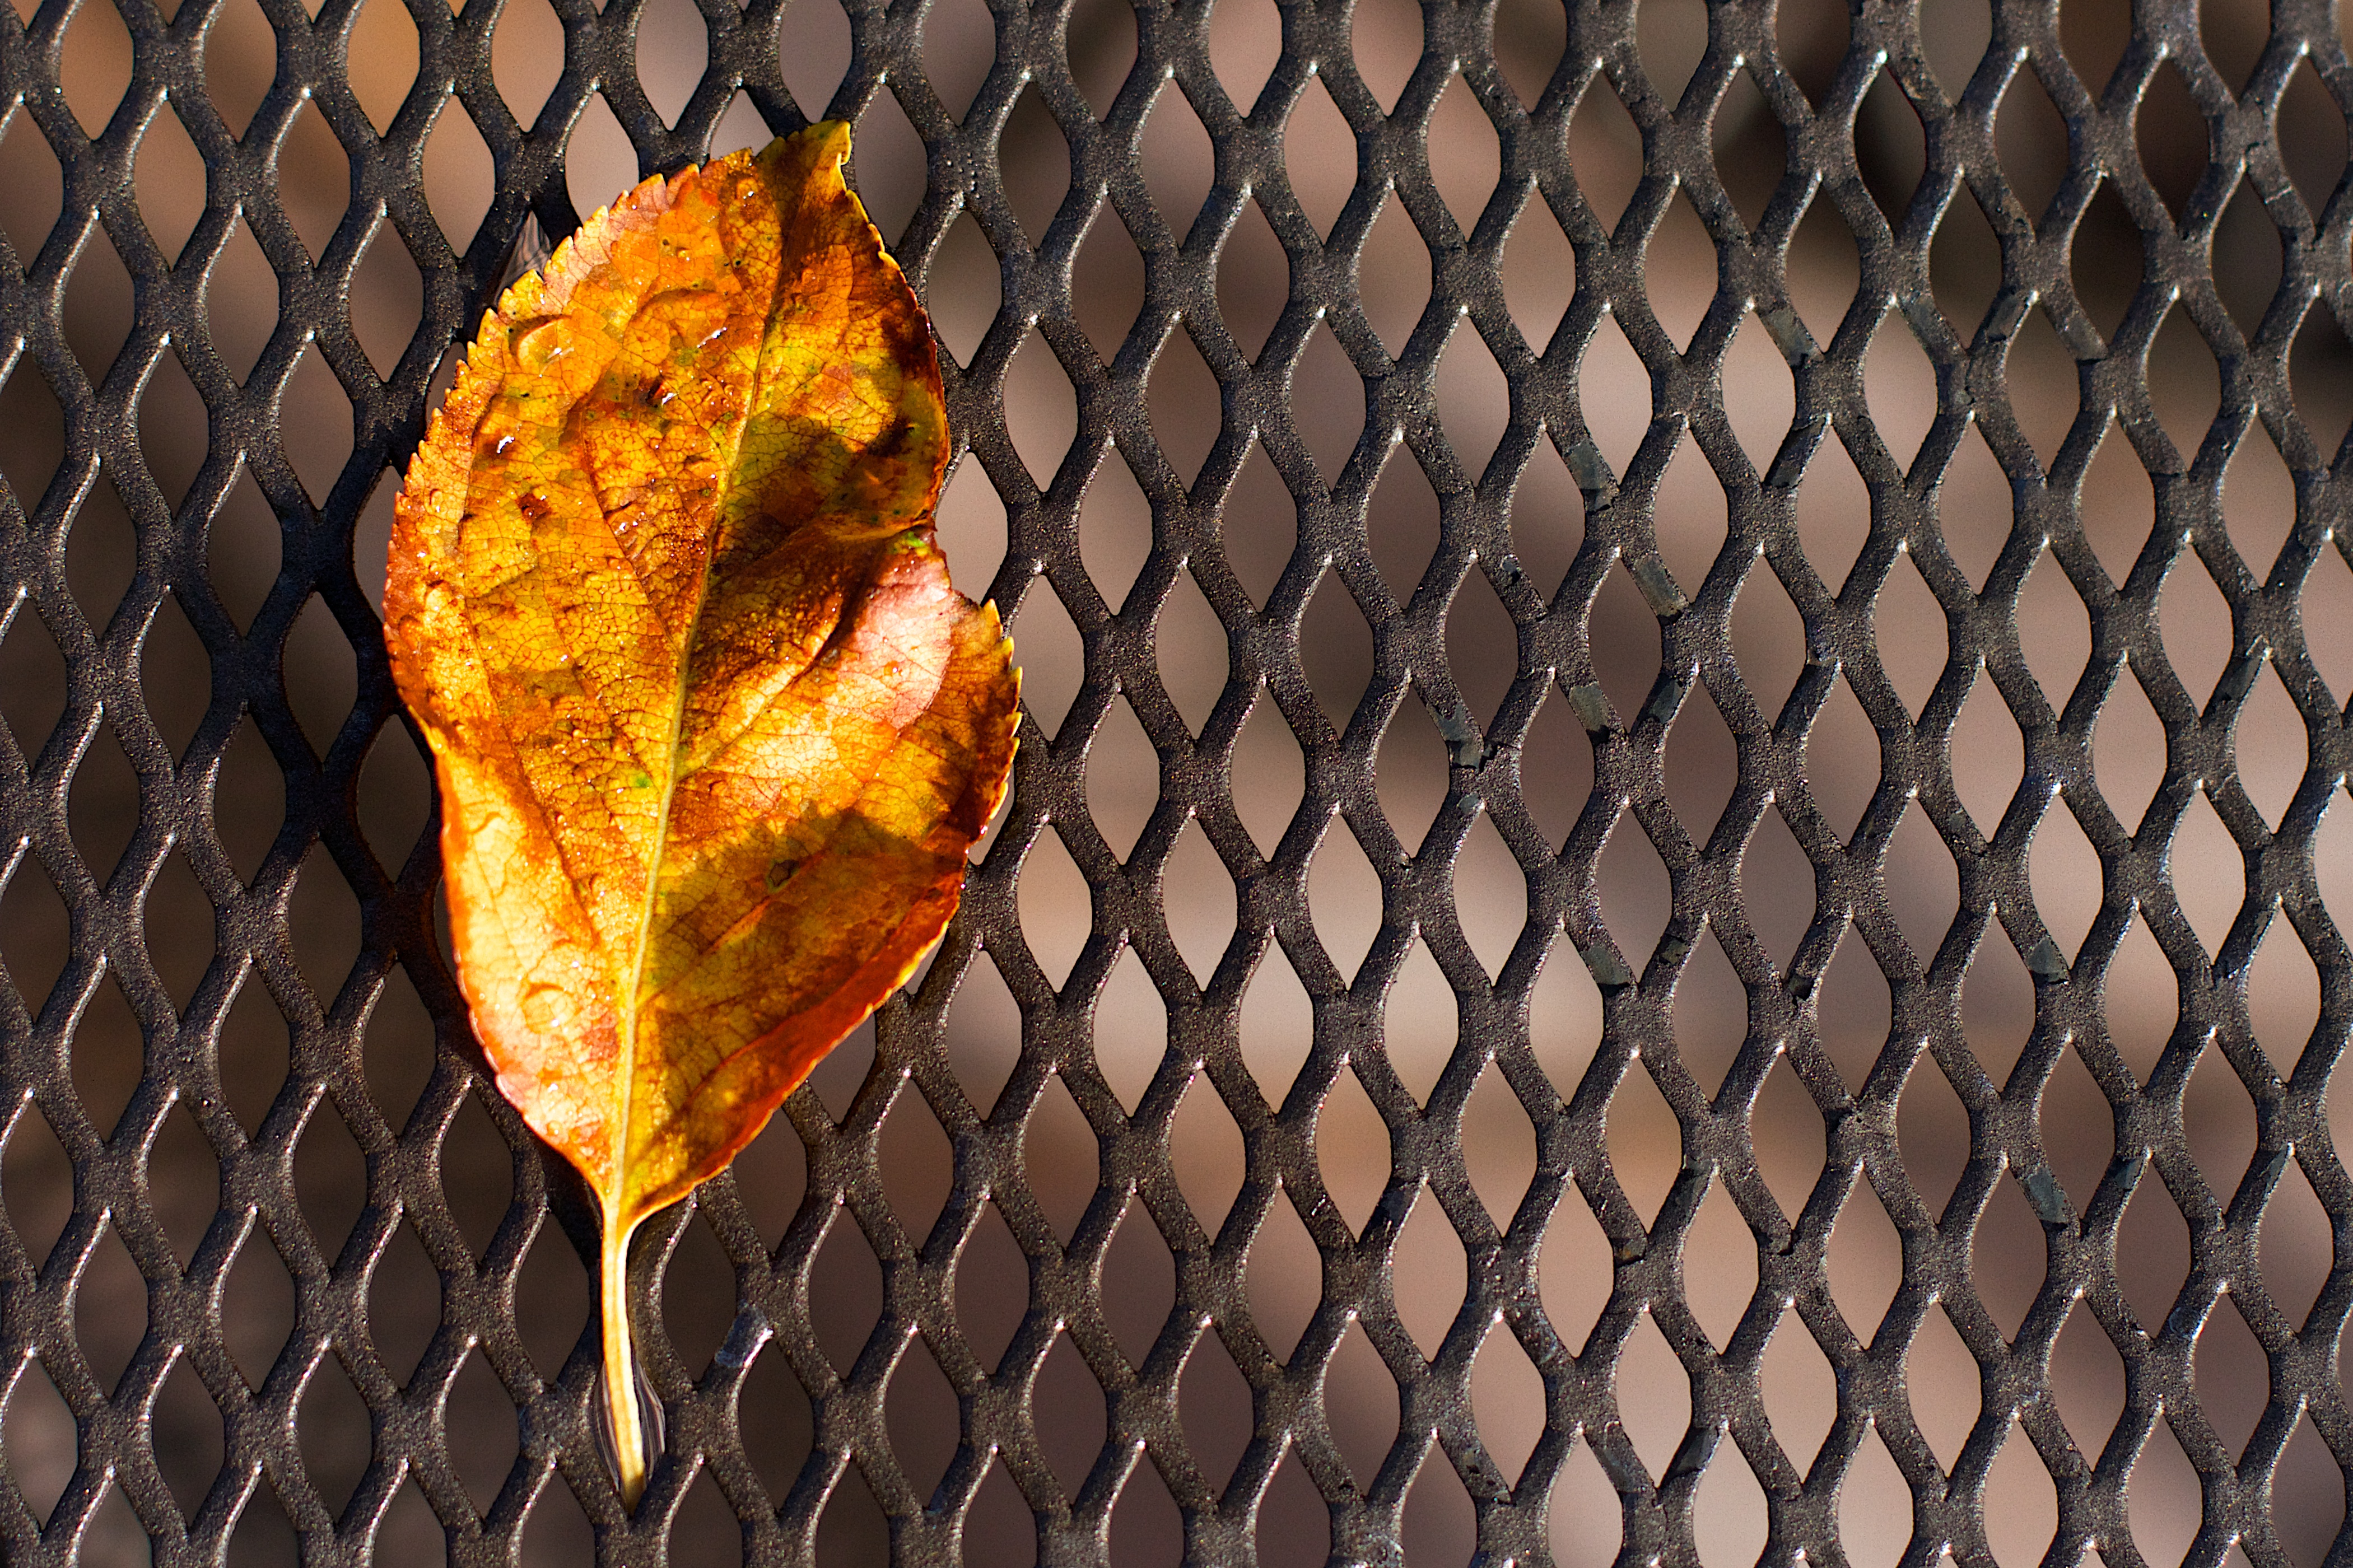 2016/366/299 drops on dropped leaf photo